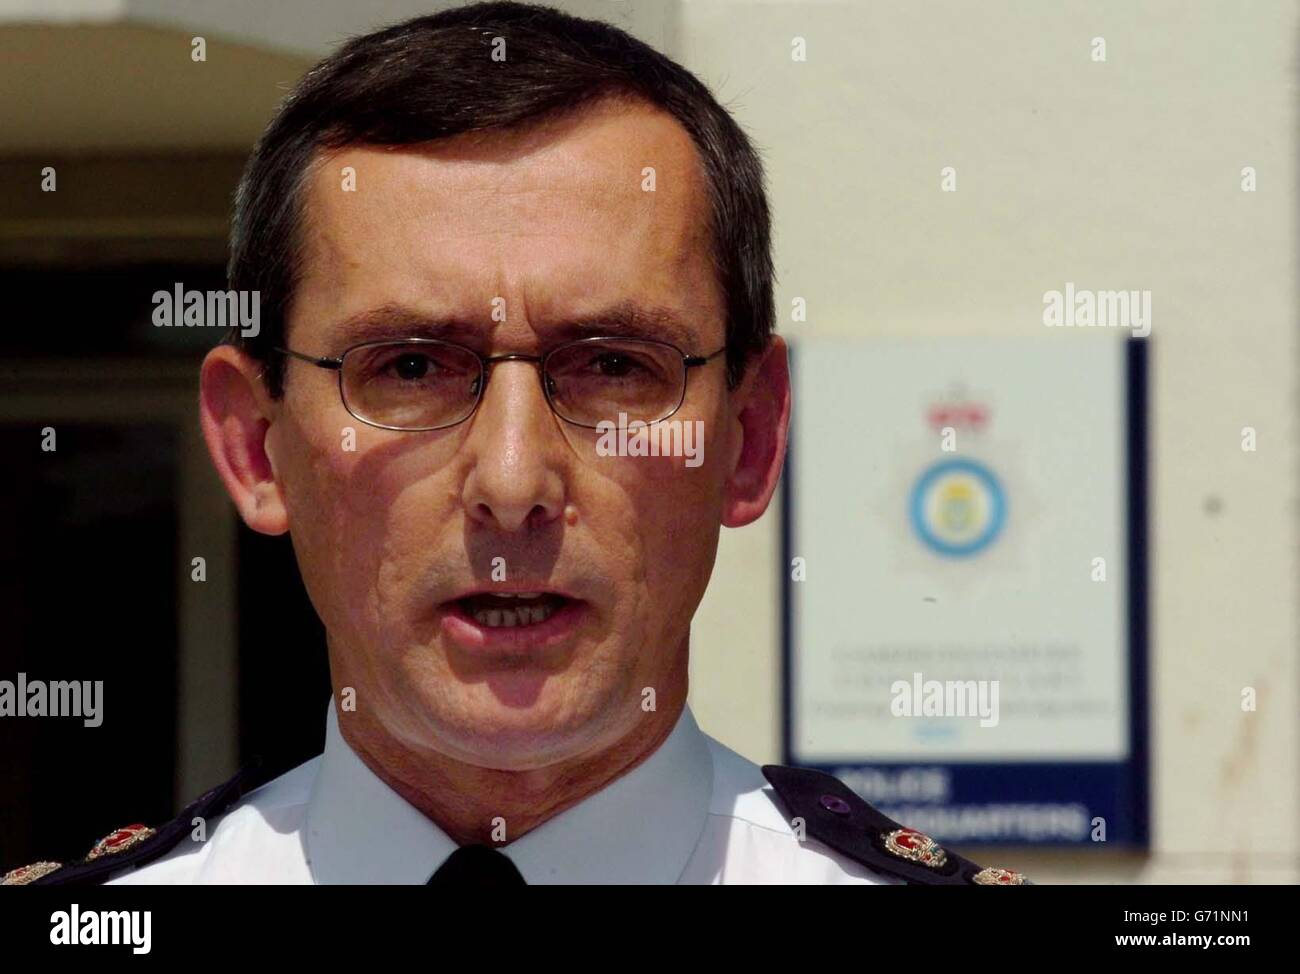 Cambridgeshire Chief Constable Tom Lloyd making a statement, outside his force's headquarters at Huntingdon following the publication of the Bichard Inquiry into how child killer Ian Huntley slipped through the police intelligence net and a report from Her Majesty's Inspectorate of Constabulary which specifically analysed the performance of Cambridgeshire Police during the Soham inquiry. Stock Photo